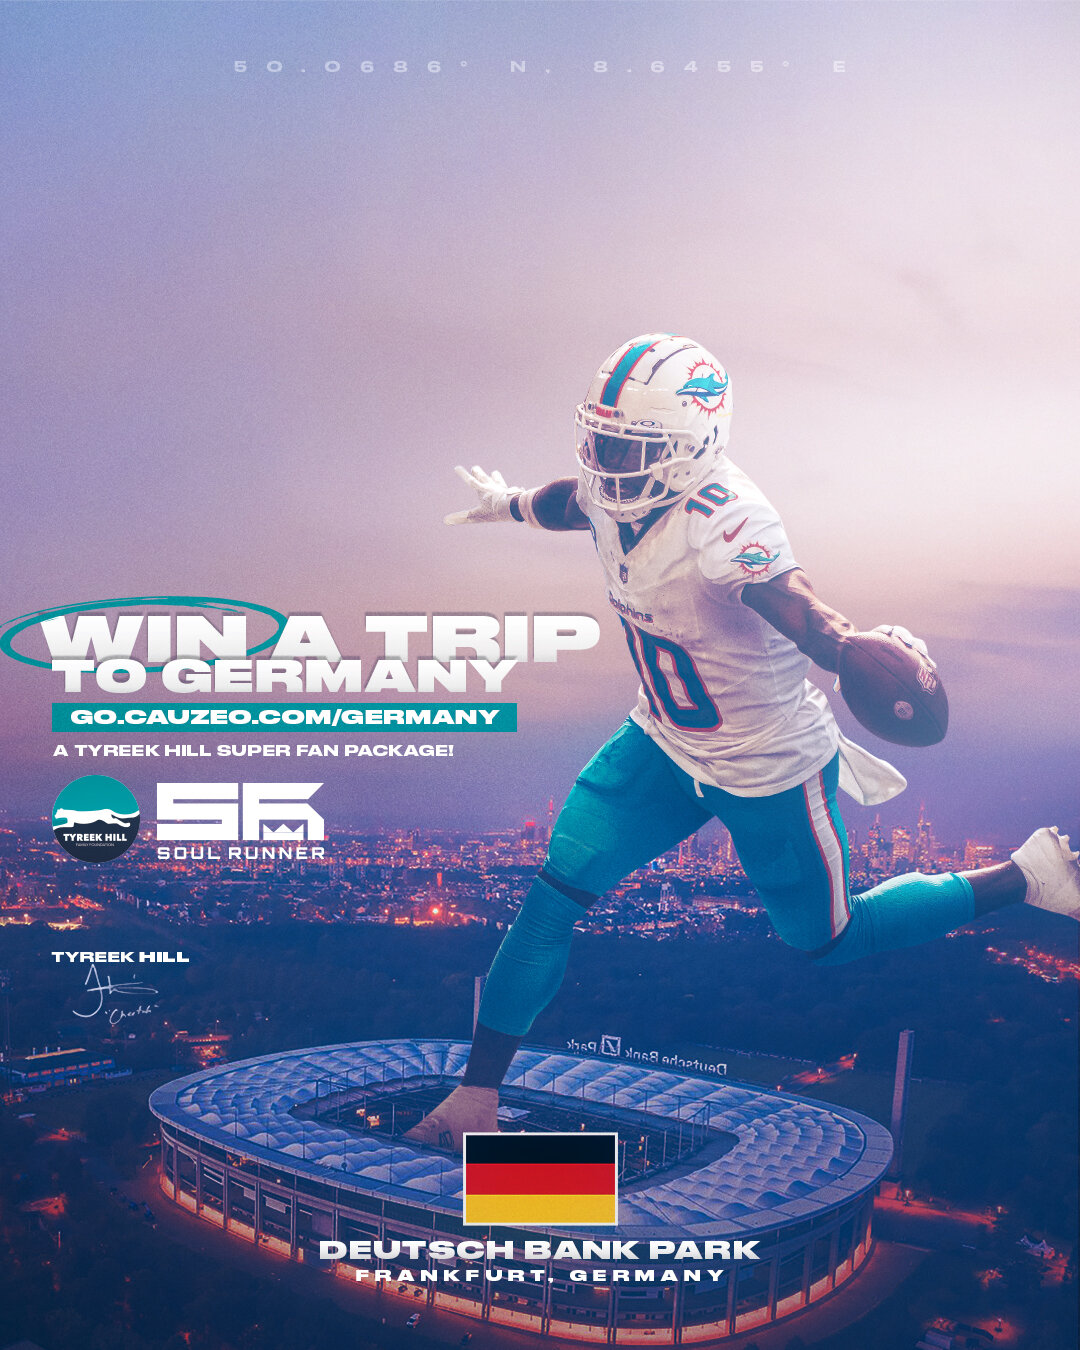 Get your passports ready! ✈️🇩🇪 We've teamed up with @SoulRunner to send you AND a guest to Frankfurt to catch @cheetah and the #Dolphins take on the #Chiefs! Donate $10 or more and you're entered to win flights, hotel, game tickets and a $100 @Soul